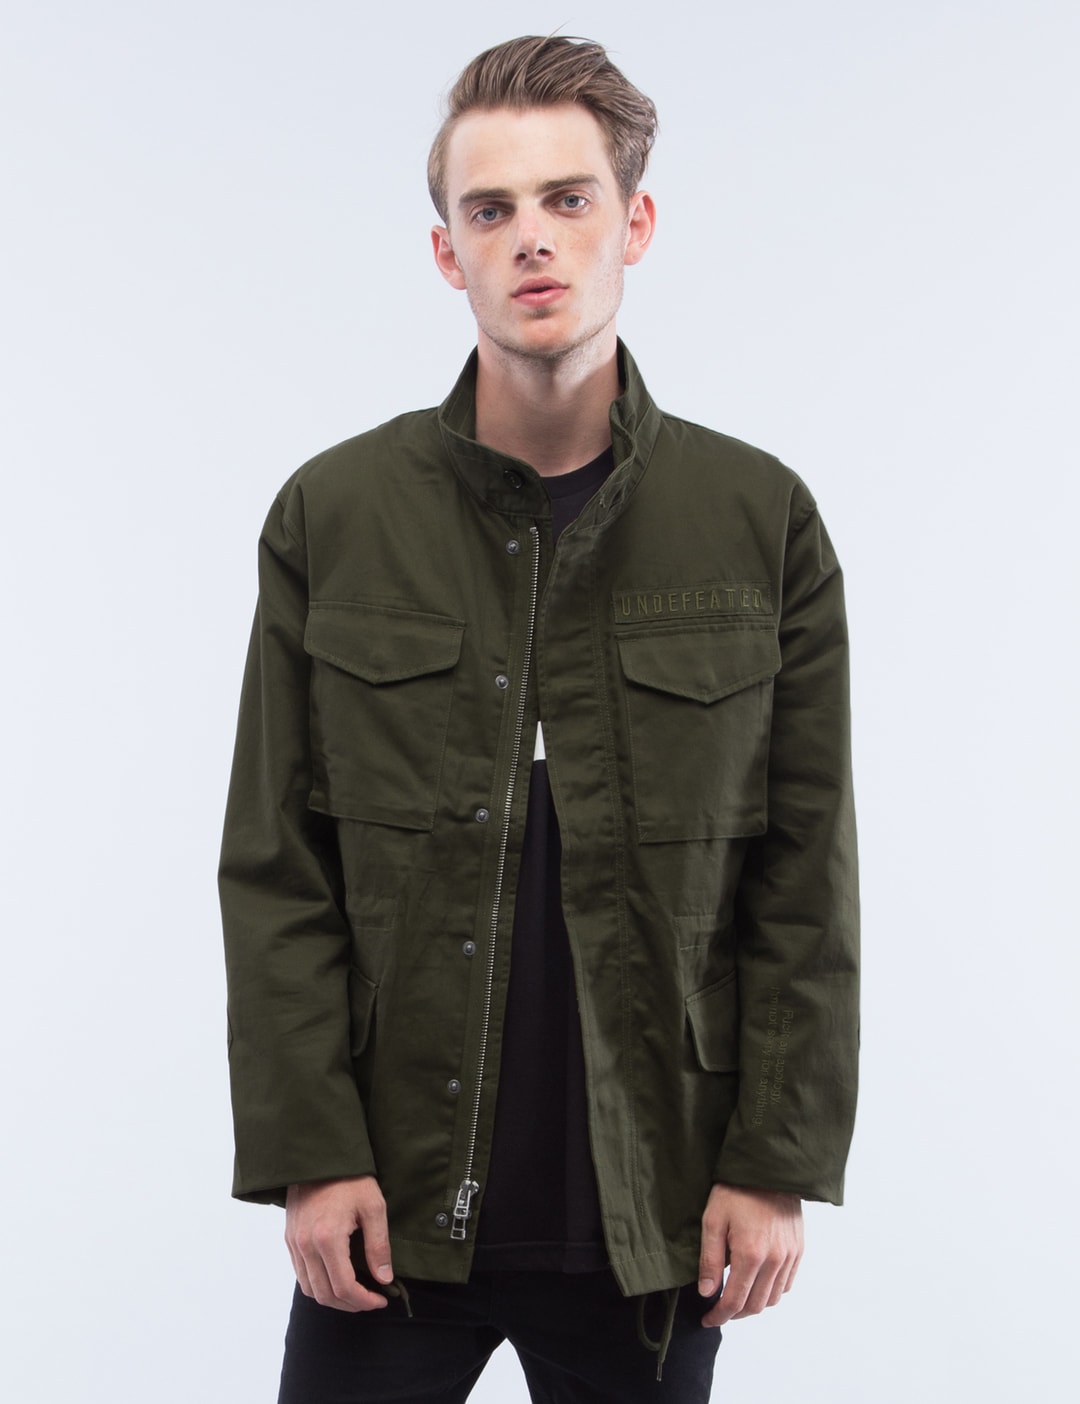 Undefeated - Undefeated Field Jacket | HBX - Globally Curated Fashion ...